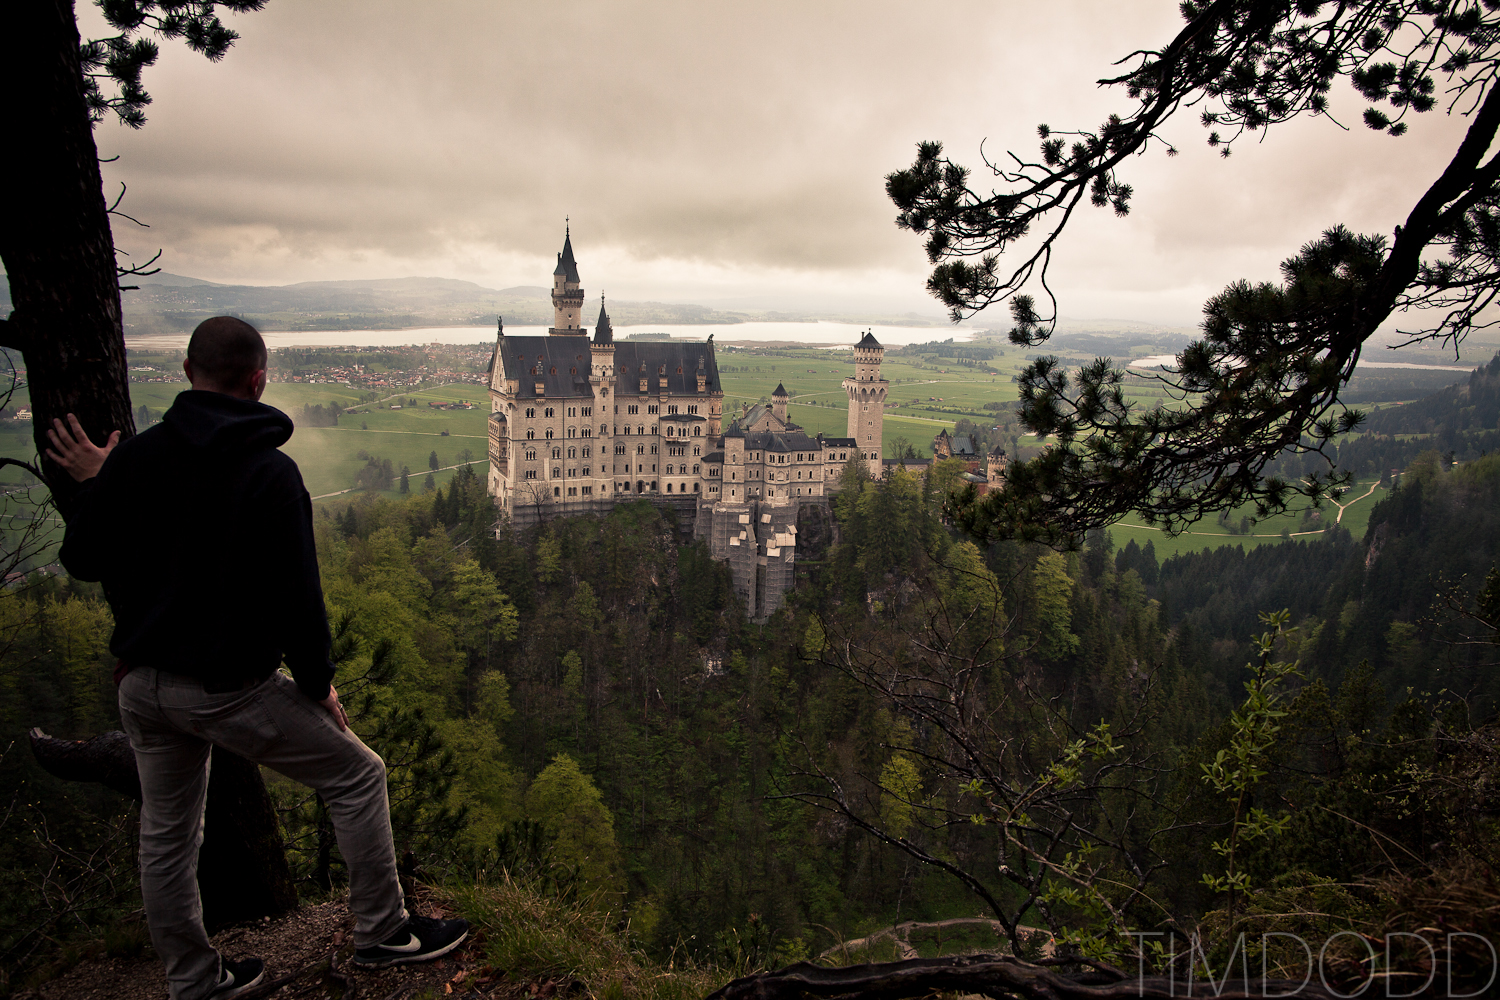 Neuschwanstein Castle, Neuschwansteinstraße, Hohenschwangau, Germany, Tim Dodd Photography, Cedar Falls, Iowa 2 Travel to Europe for cheap, top 10 things to see in Europe, must see, photographers guide, photographs, best pictures,